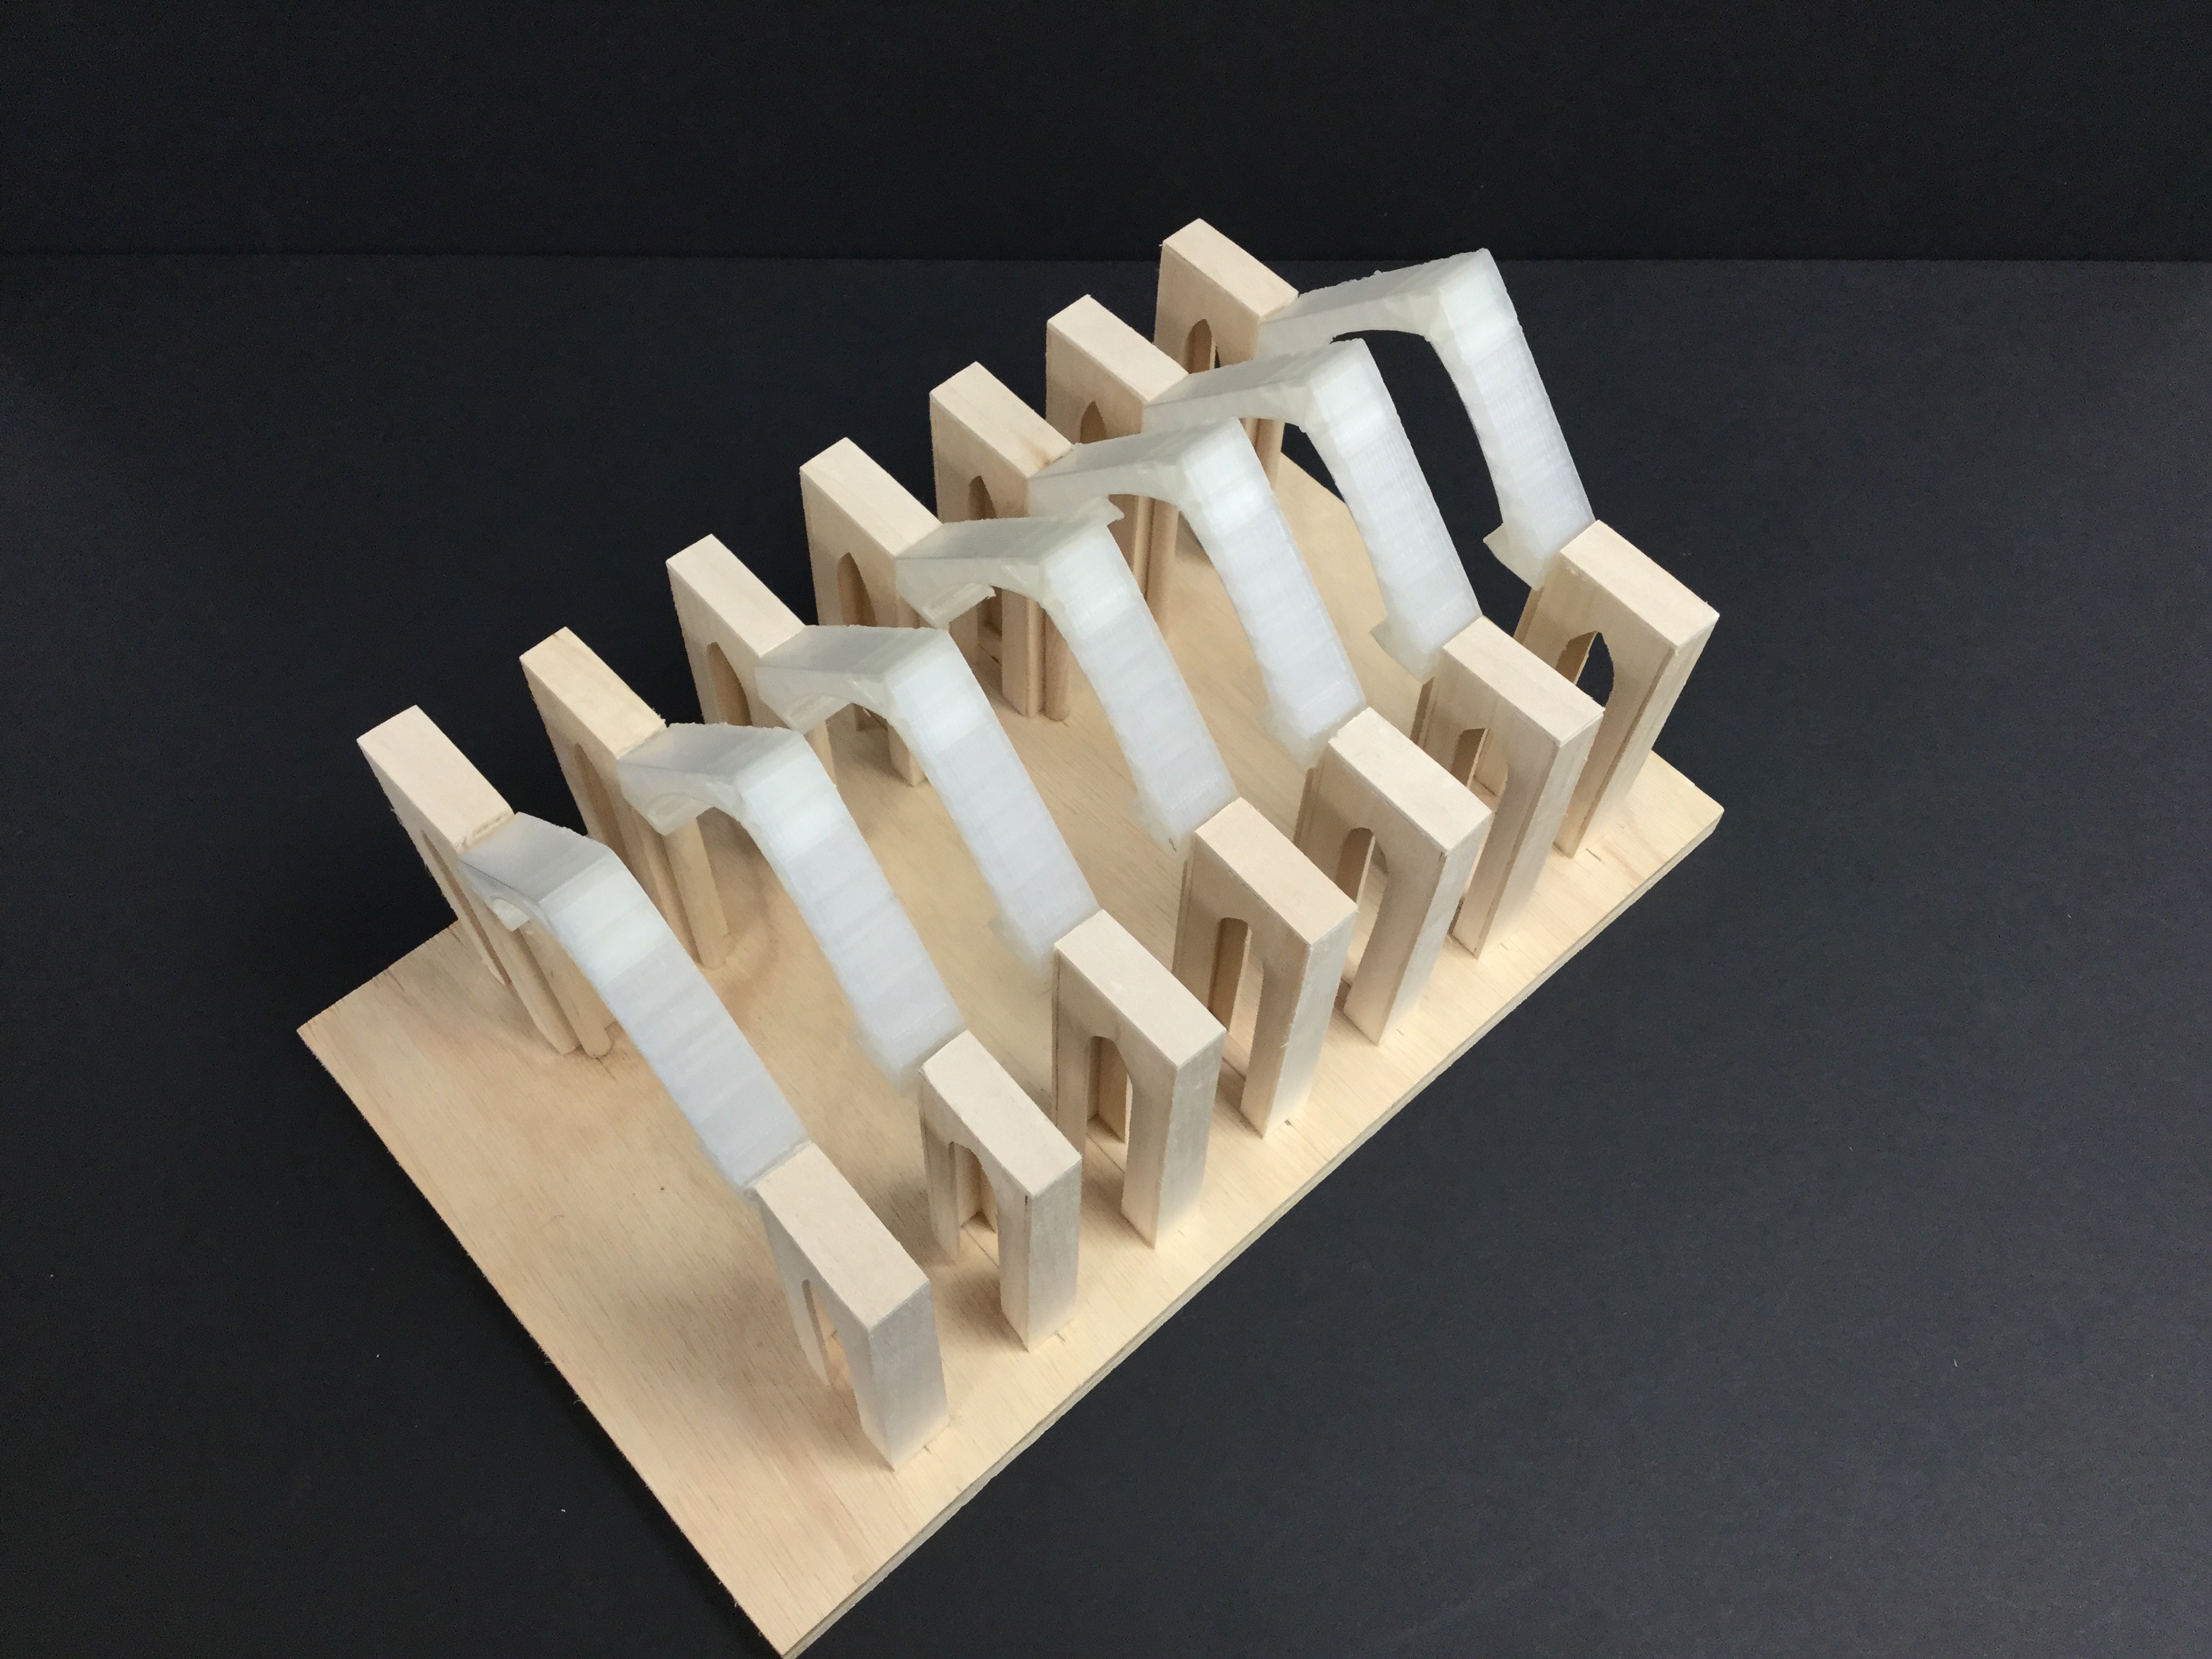 Framing model Loyola Academy's first effort with 3D model